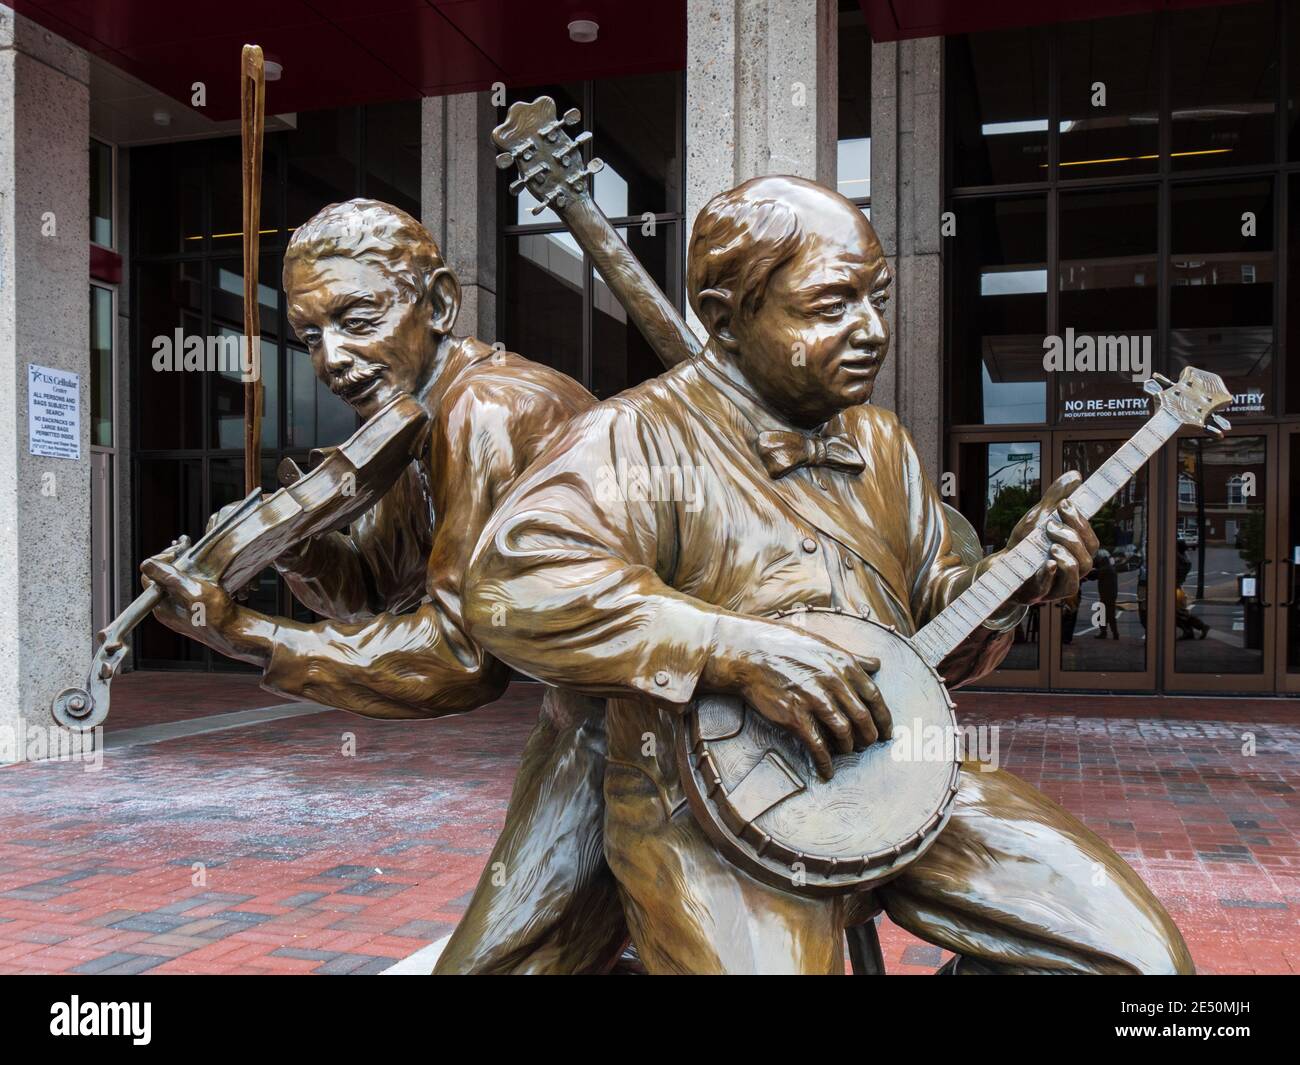 Asheville, NC - May 4, 2017: Sculptures by Gary Aslum of a banjoist and fiddler stand outside the Thomas Wolfe Auditorium and pay tribute to the cultu Stock Photo